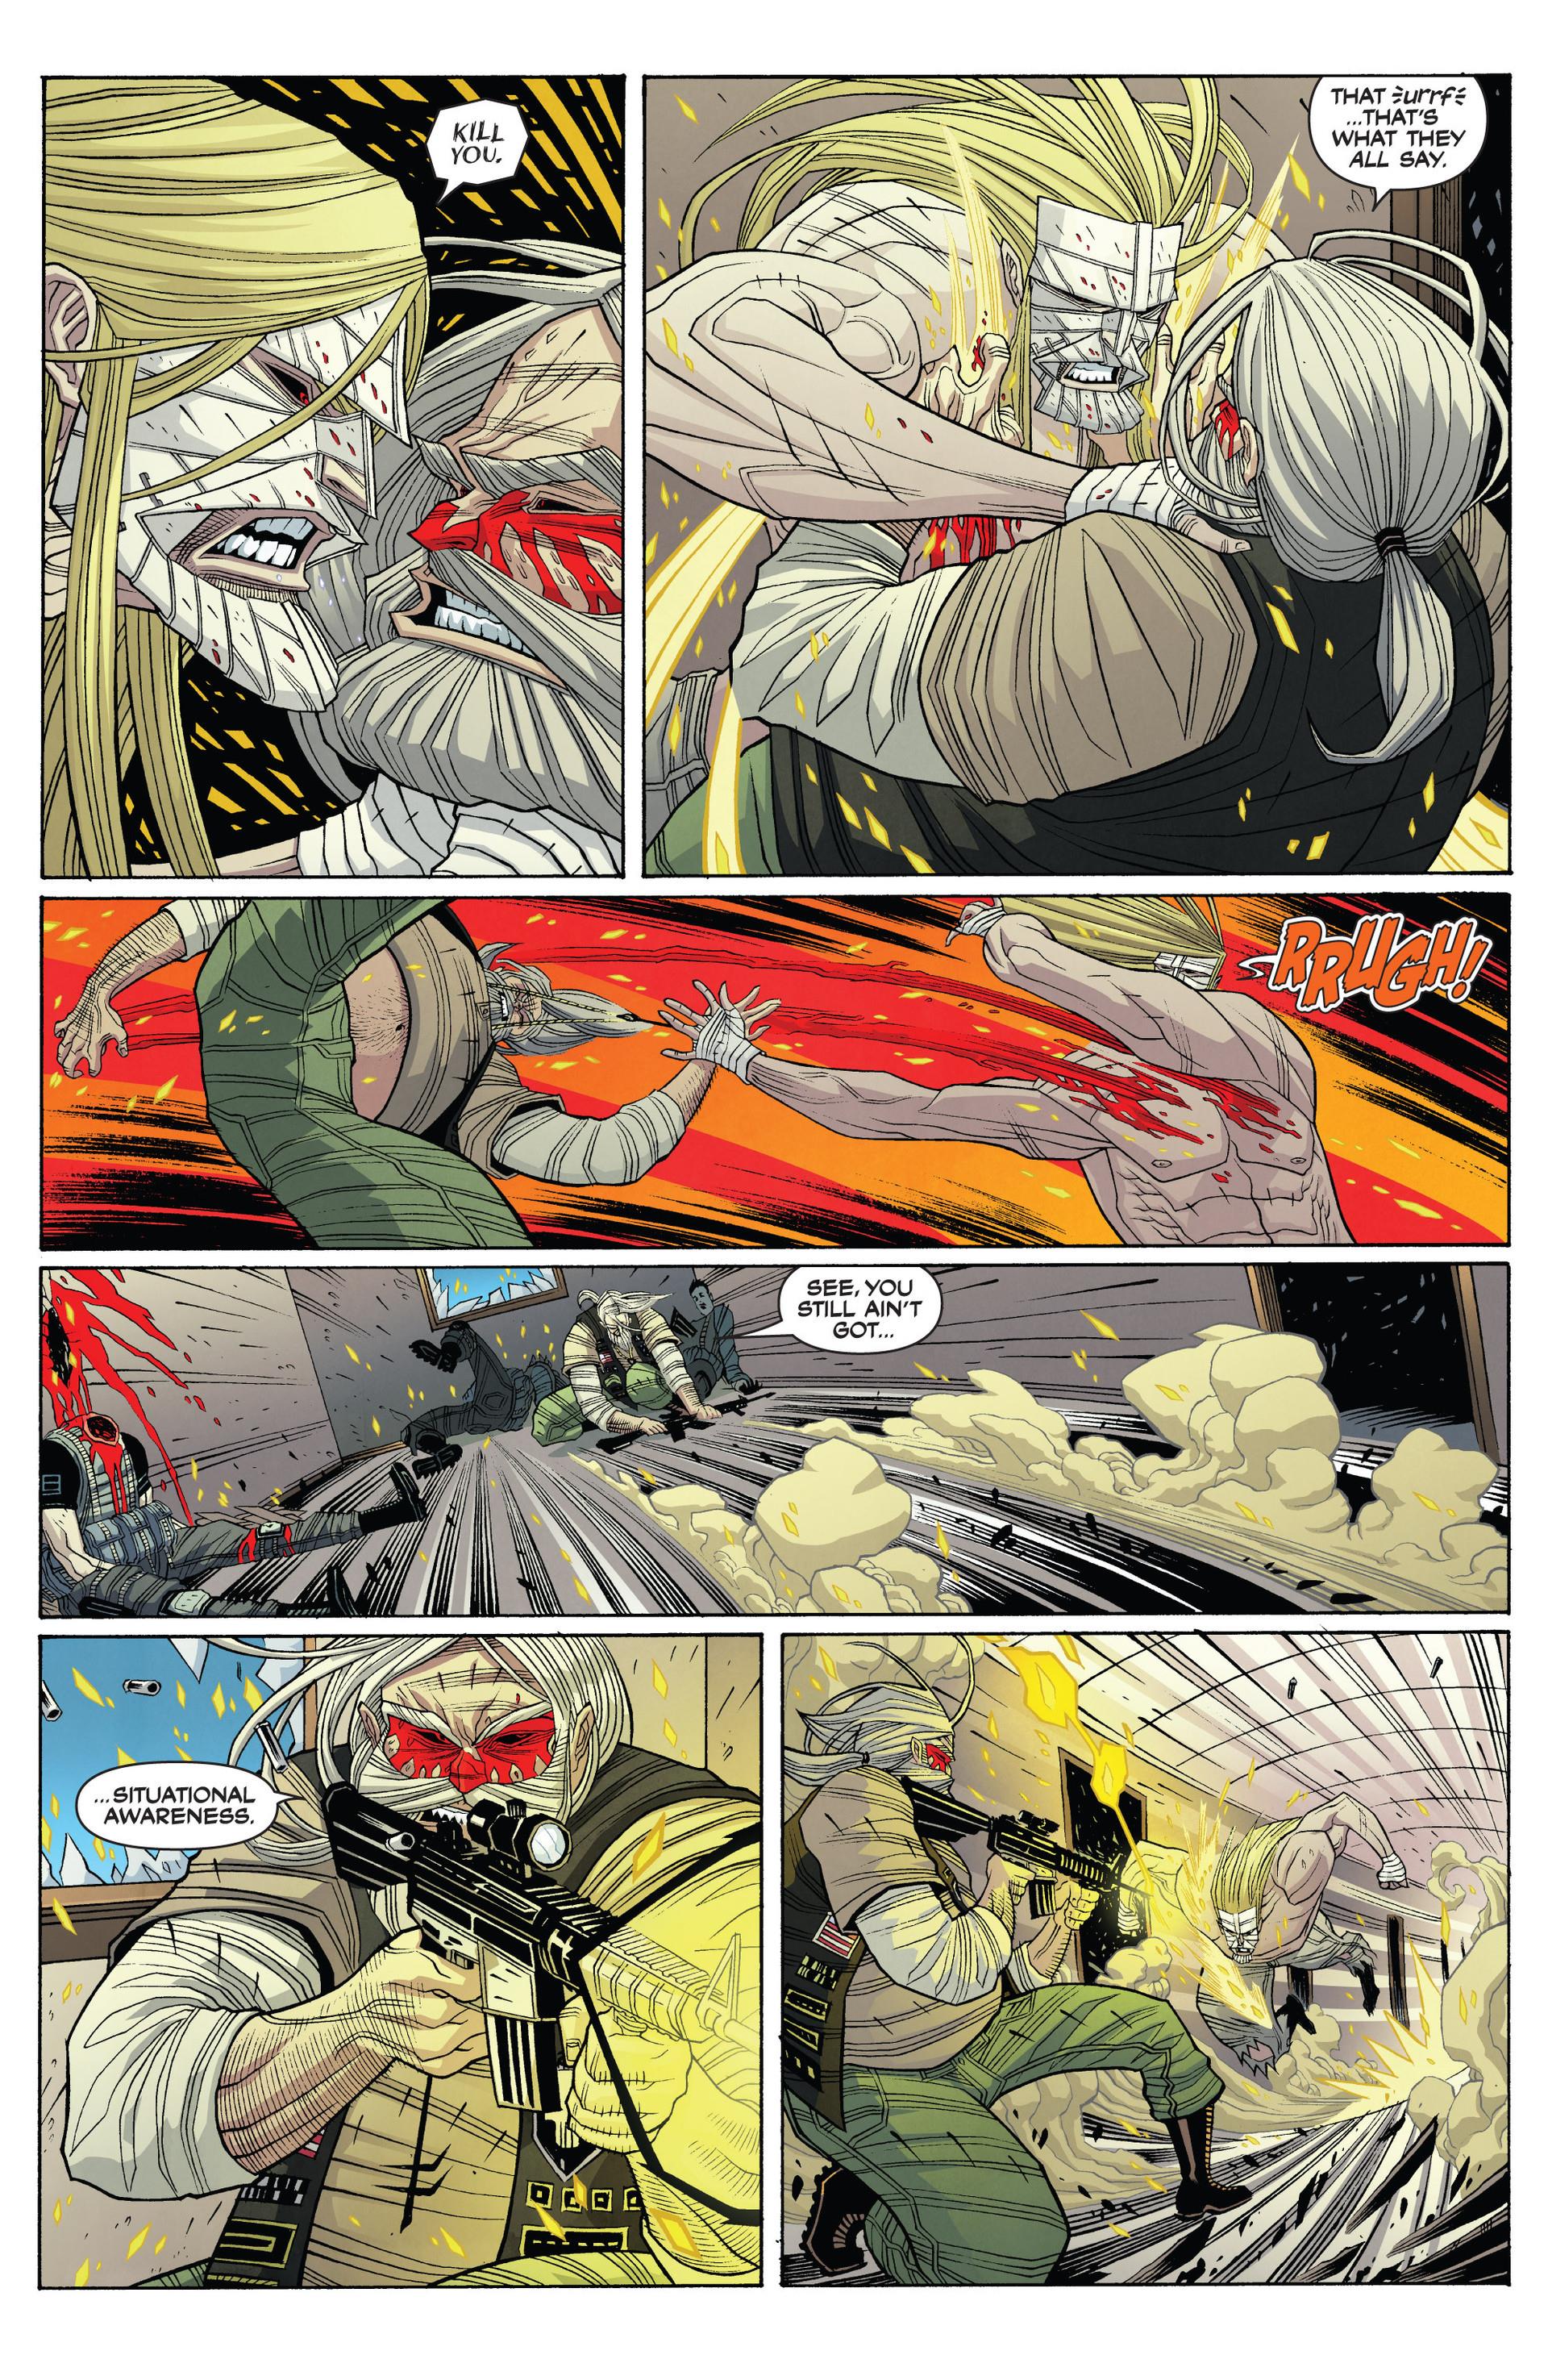 Luther Strode review